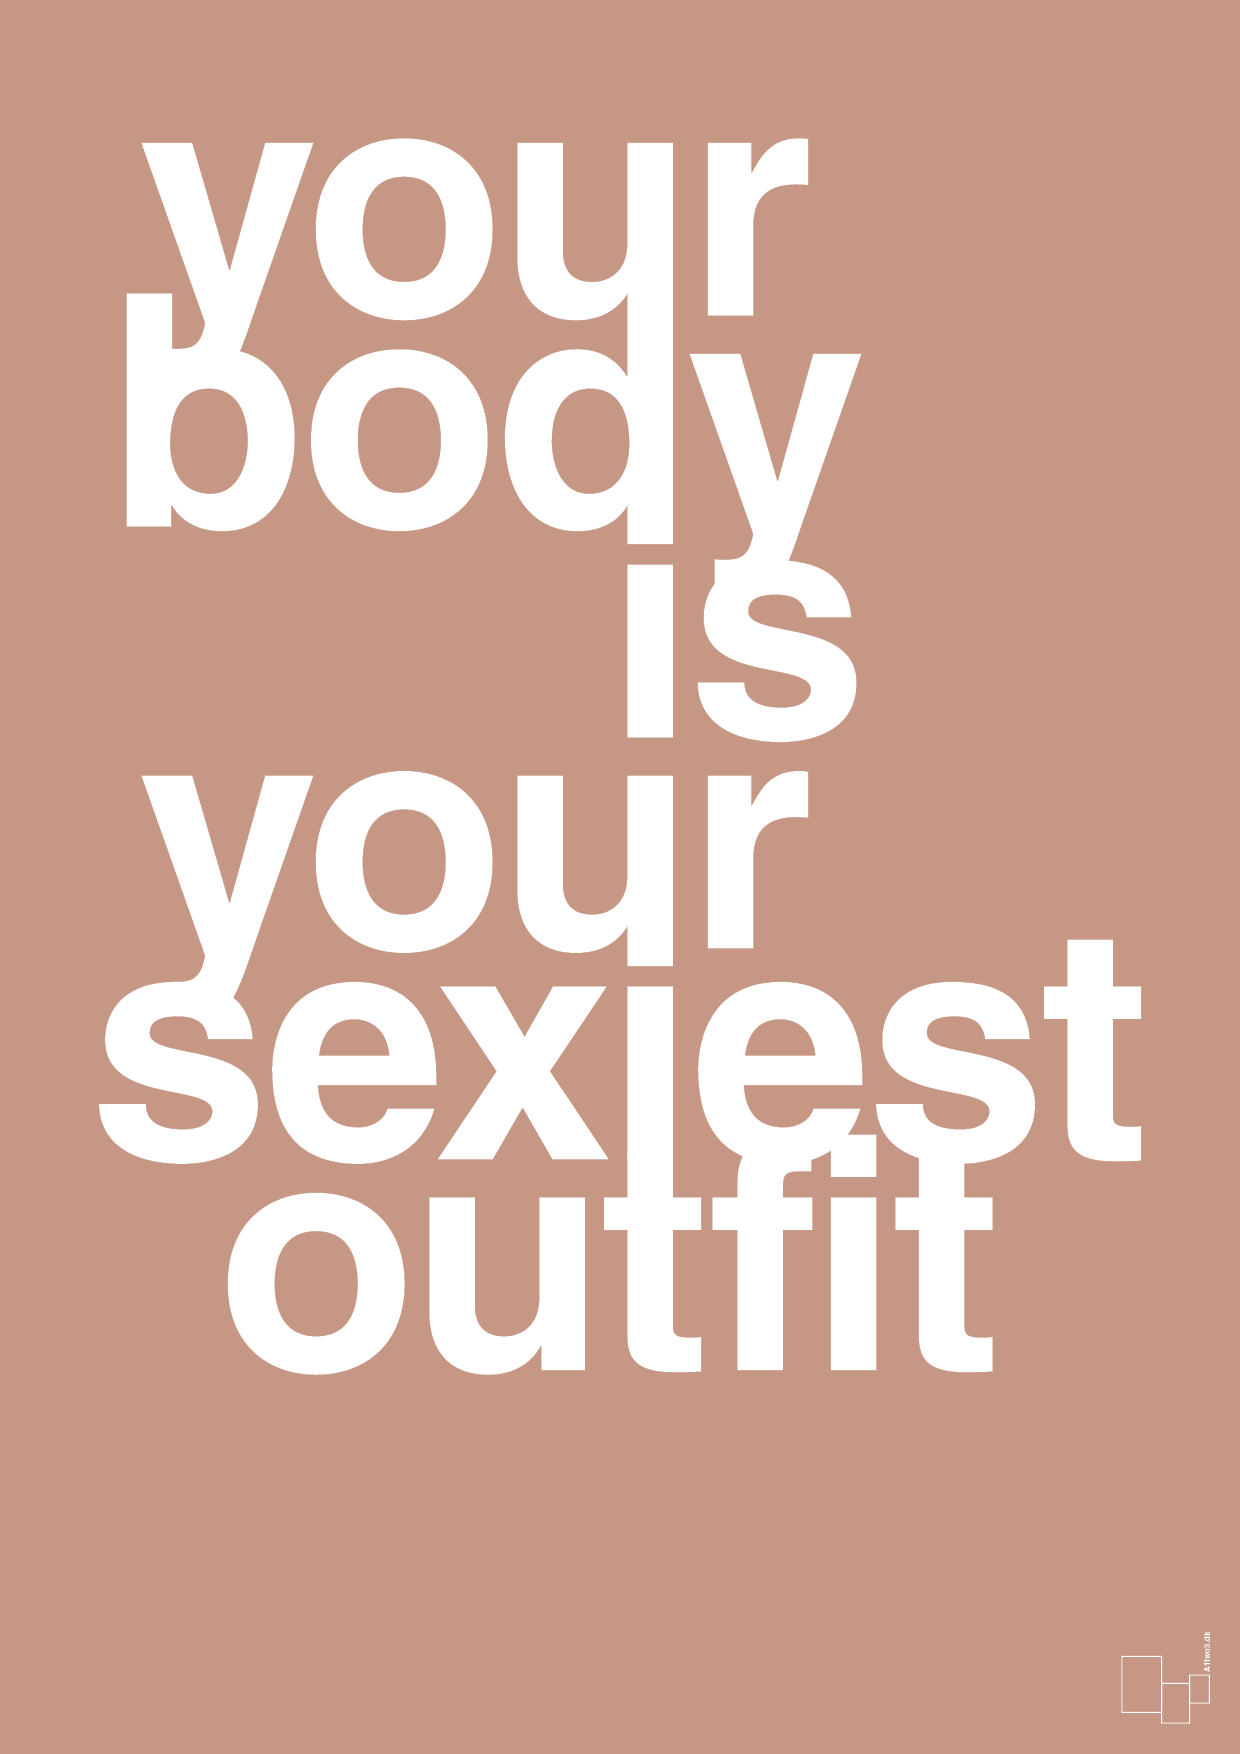 your body is your sexiest outfit - Plakat med Sport & Fritid i Powder